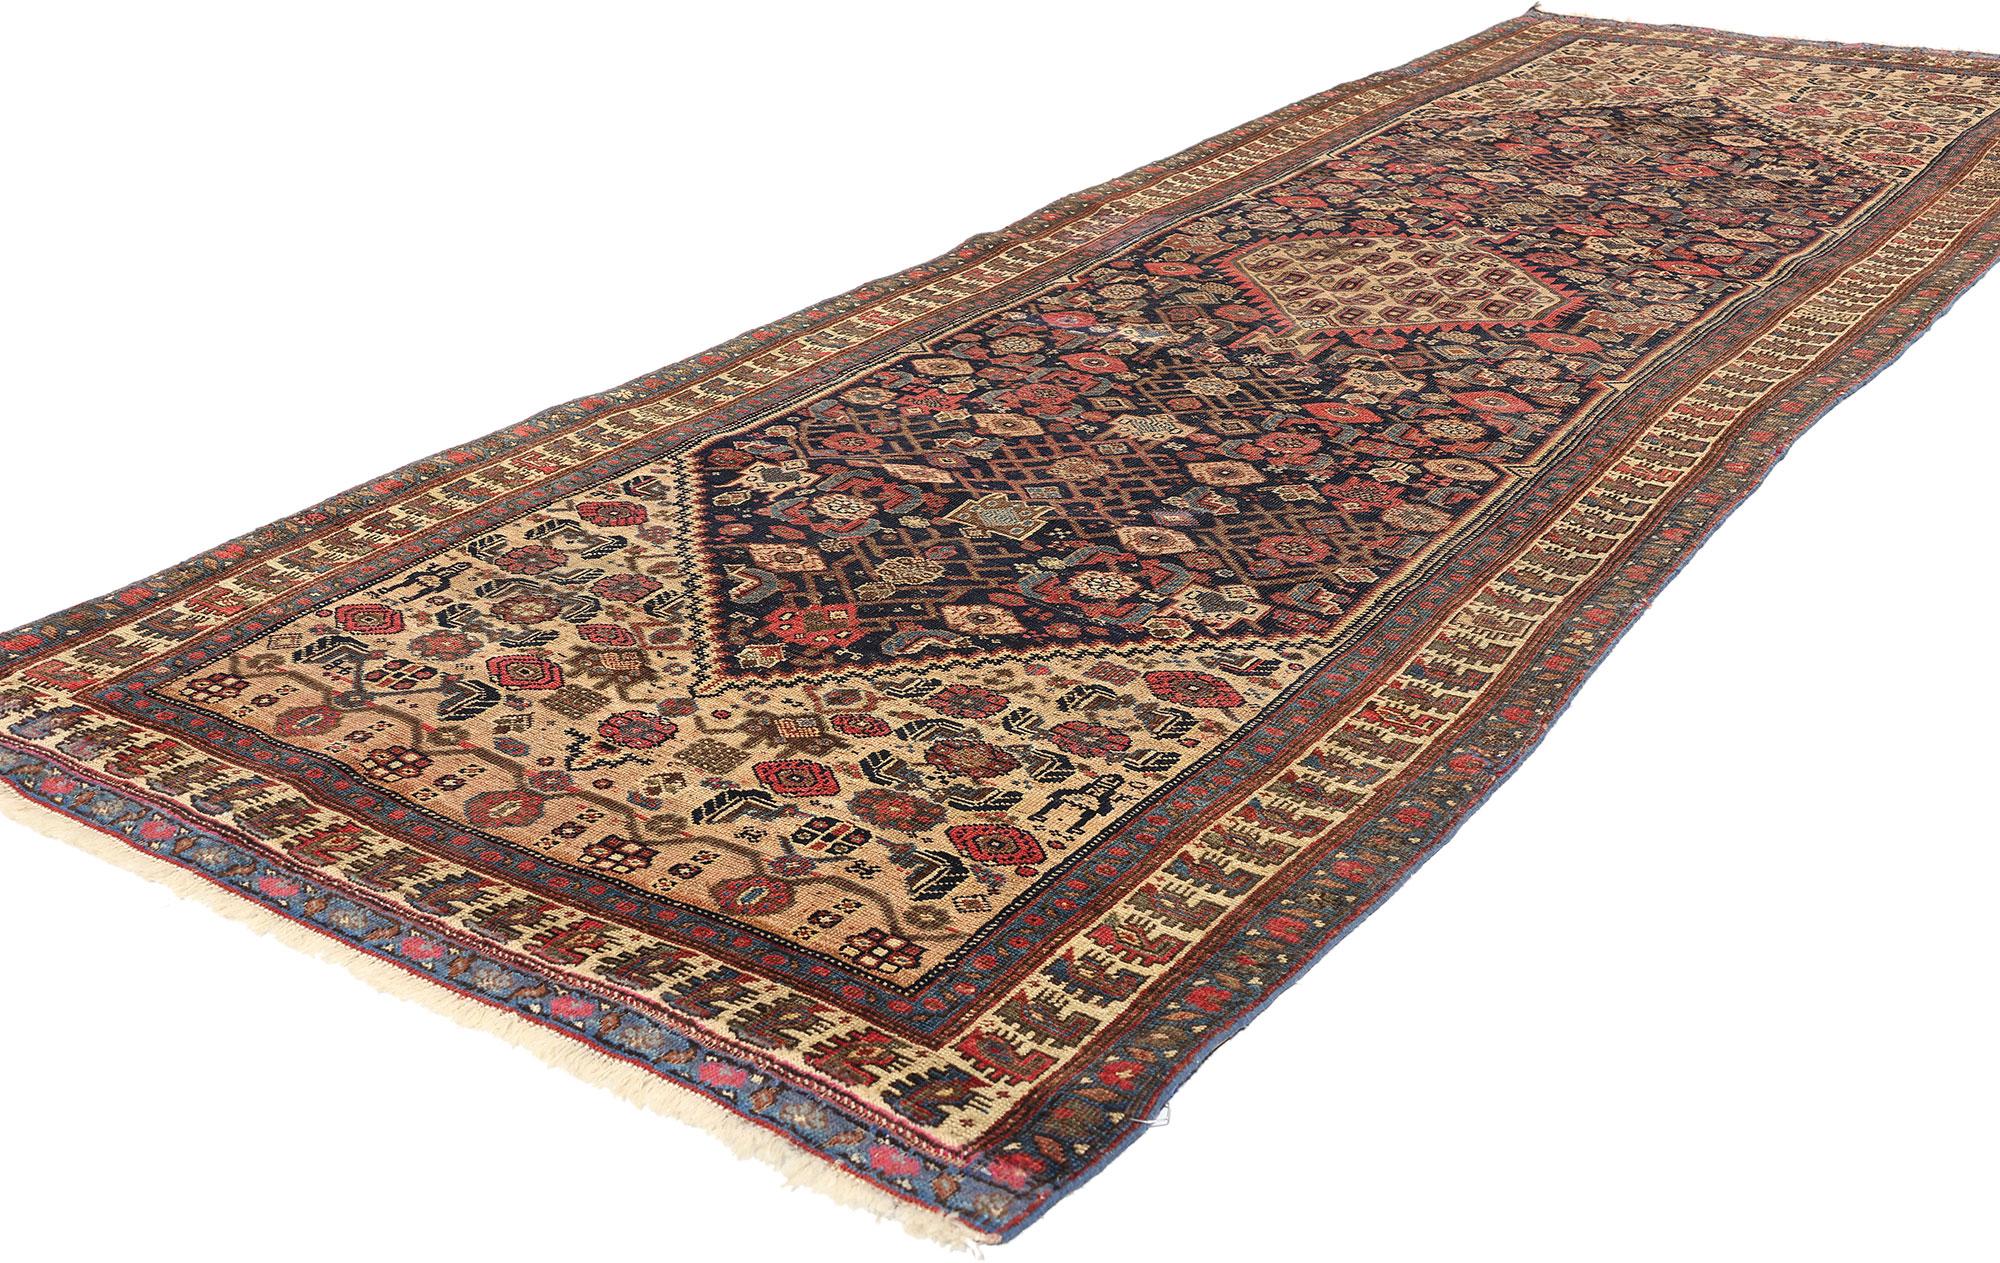 78754 Antique Persian Bijar Rug Runner, 03'08 x 11'01. Persian Bijar carpet runners, slender and elongated, trace their origins to Bijar in western Iran, celebrated for their unparalleled durability and resilience. These masterpieces are